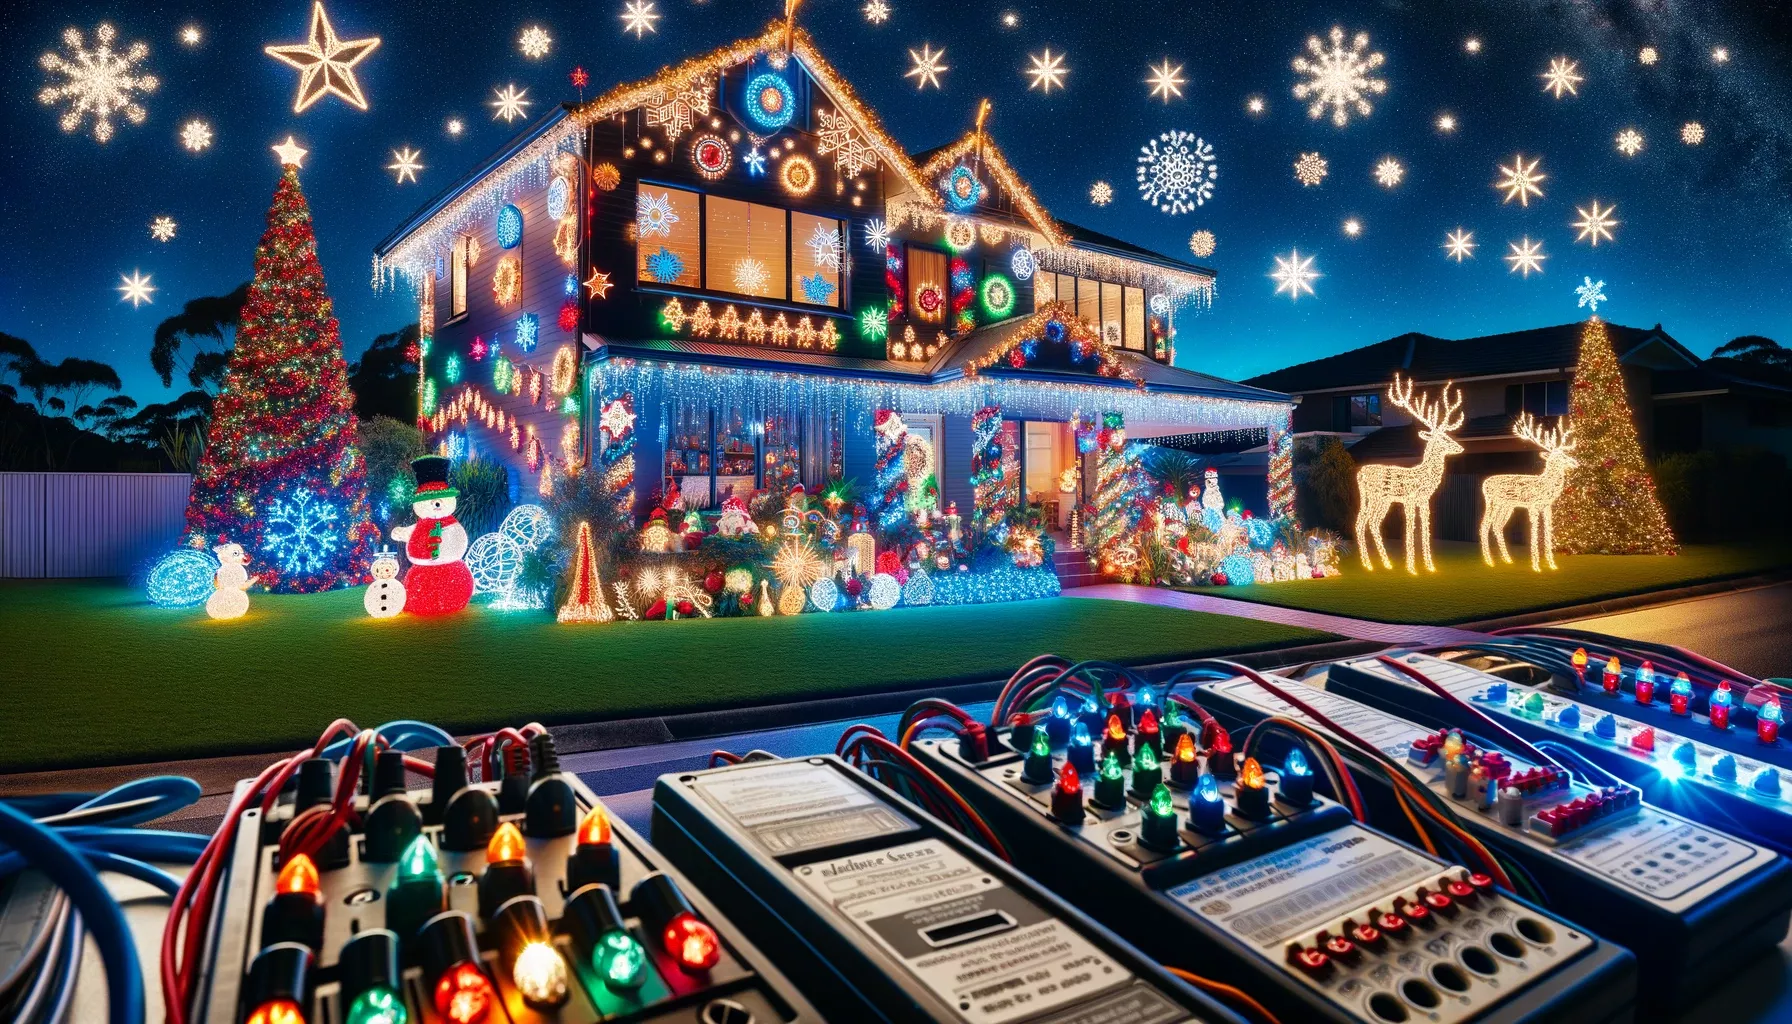 House with a lot or fairy lights and illumination controlled by a switch panel